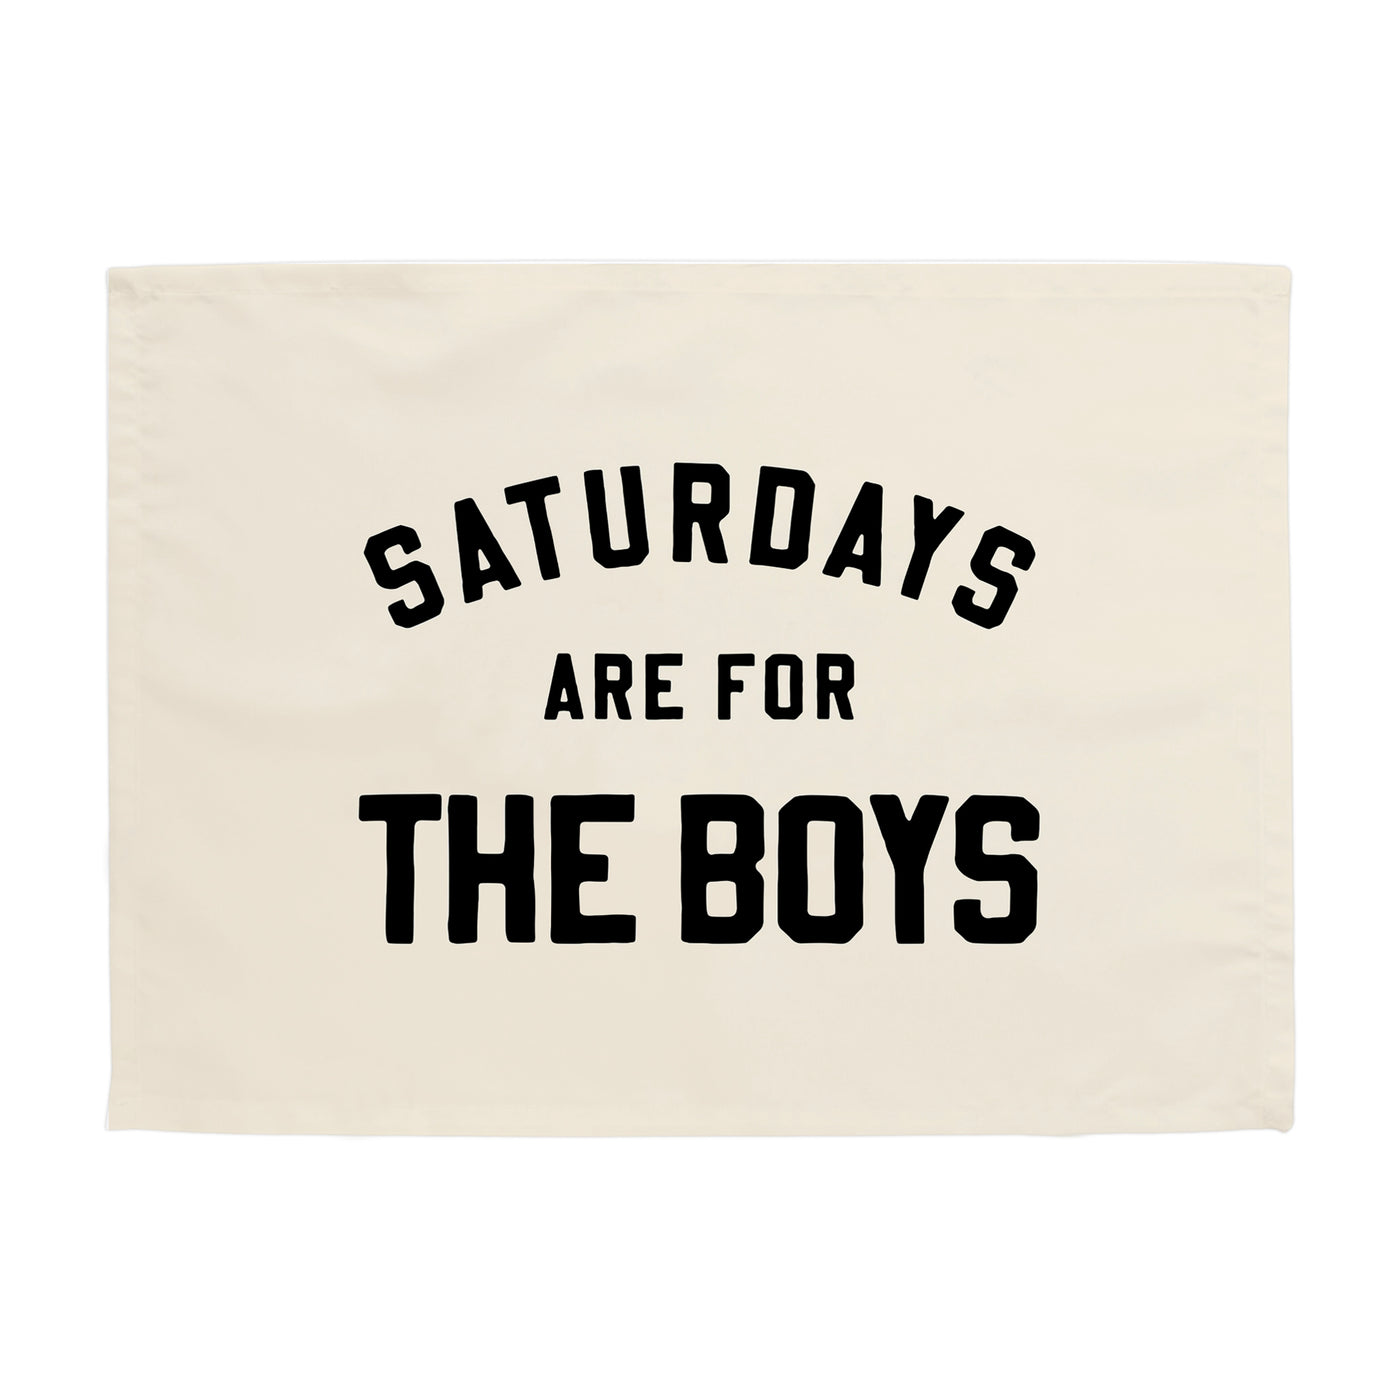 Saturdays are for the Boys Banner